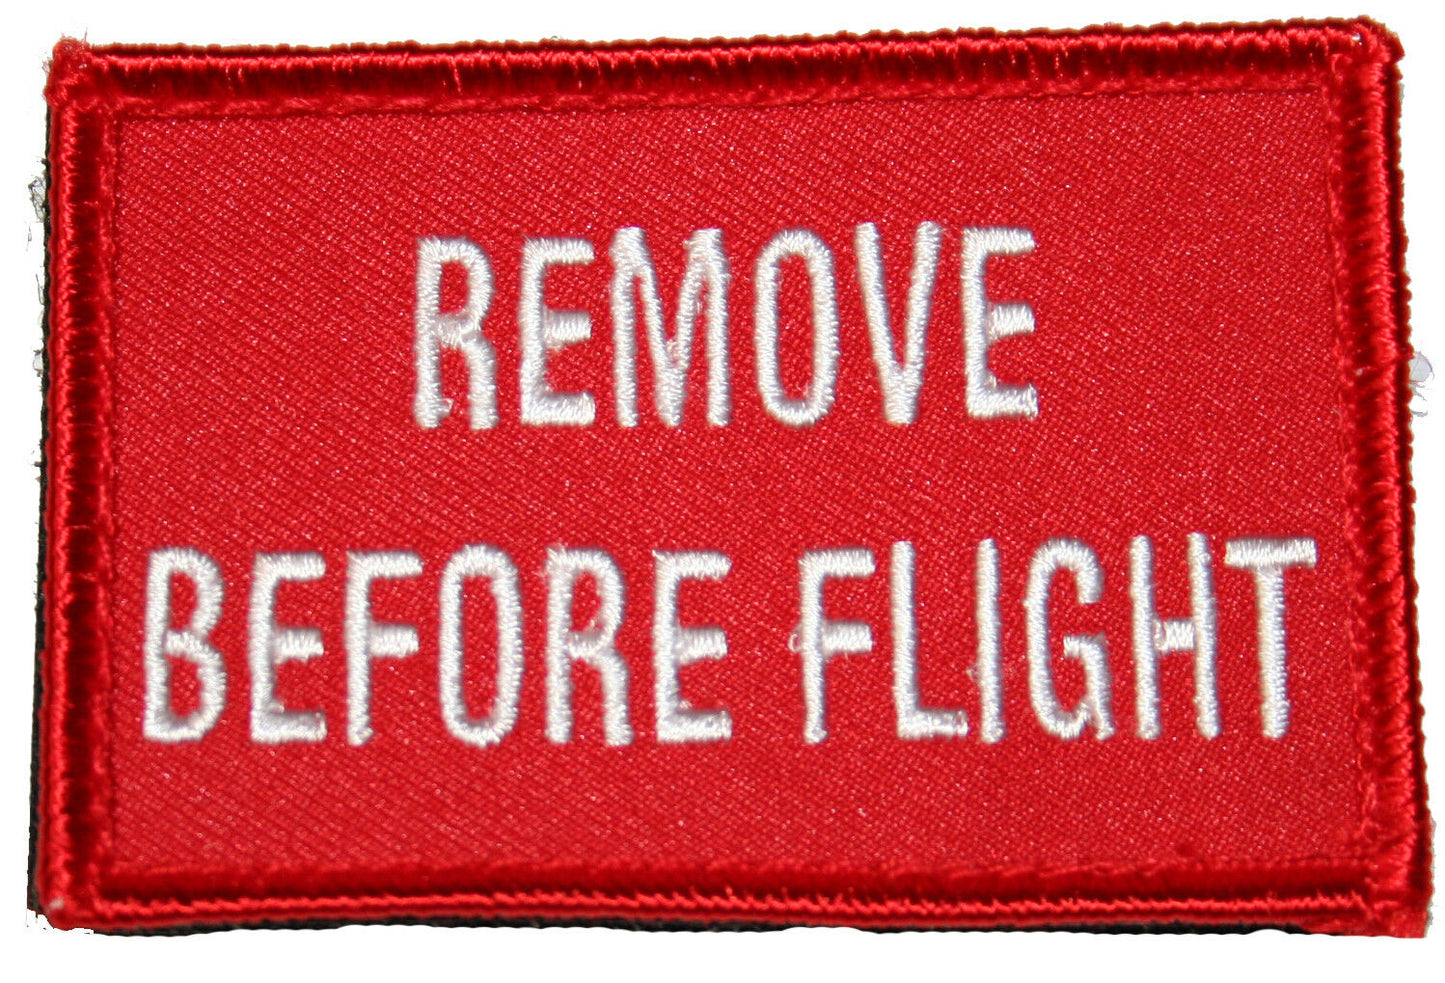 Remove Before Flight Patch Tactical Red 3" x 2"